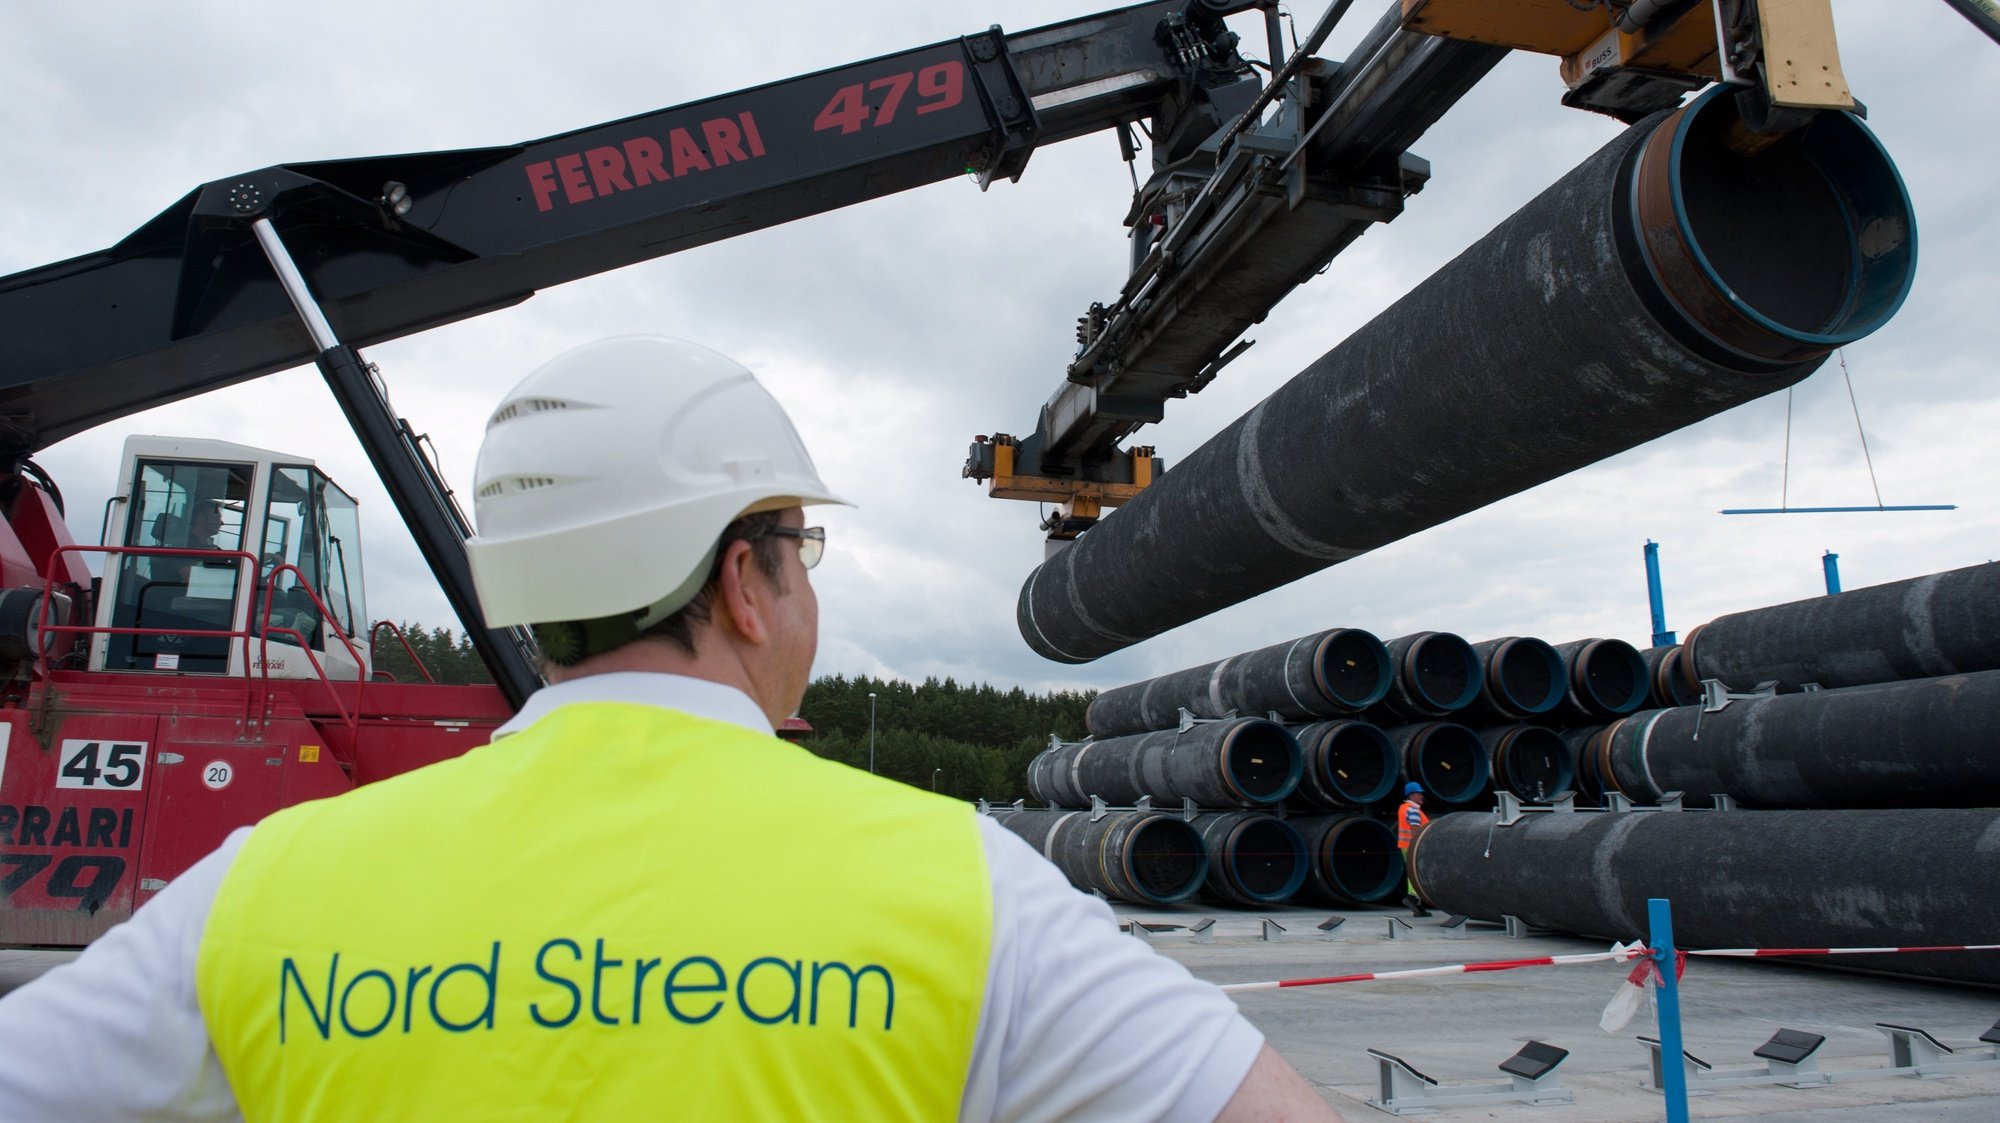 epa07366284 (FILE) - The first spare pipes for the Nord-Stream Baltic Sea pipeline are stored on shore in Lubmin, Germany, 19 June 2012 (reissued 13 February 2019). Reports on 13 February 2019 state the European Union has reached a provisional compromise agreement on more control on the Nord Stream gas pipeline that is currently being built across the Baltic Sea from Russia to Germany.  EPA/STEFAN SAUER  GERMANY OUT